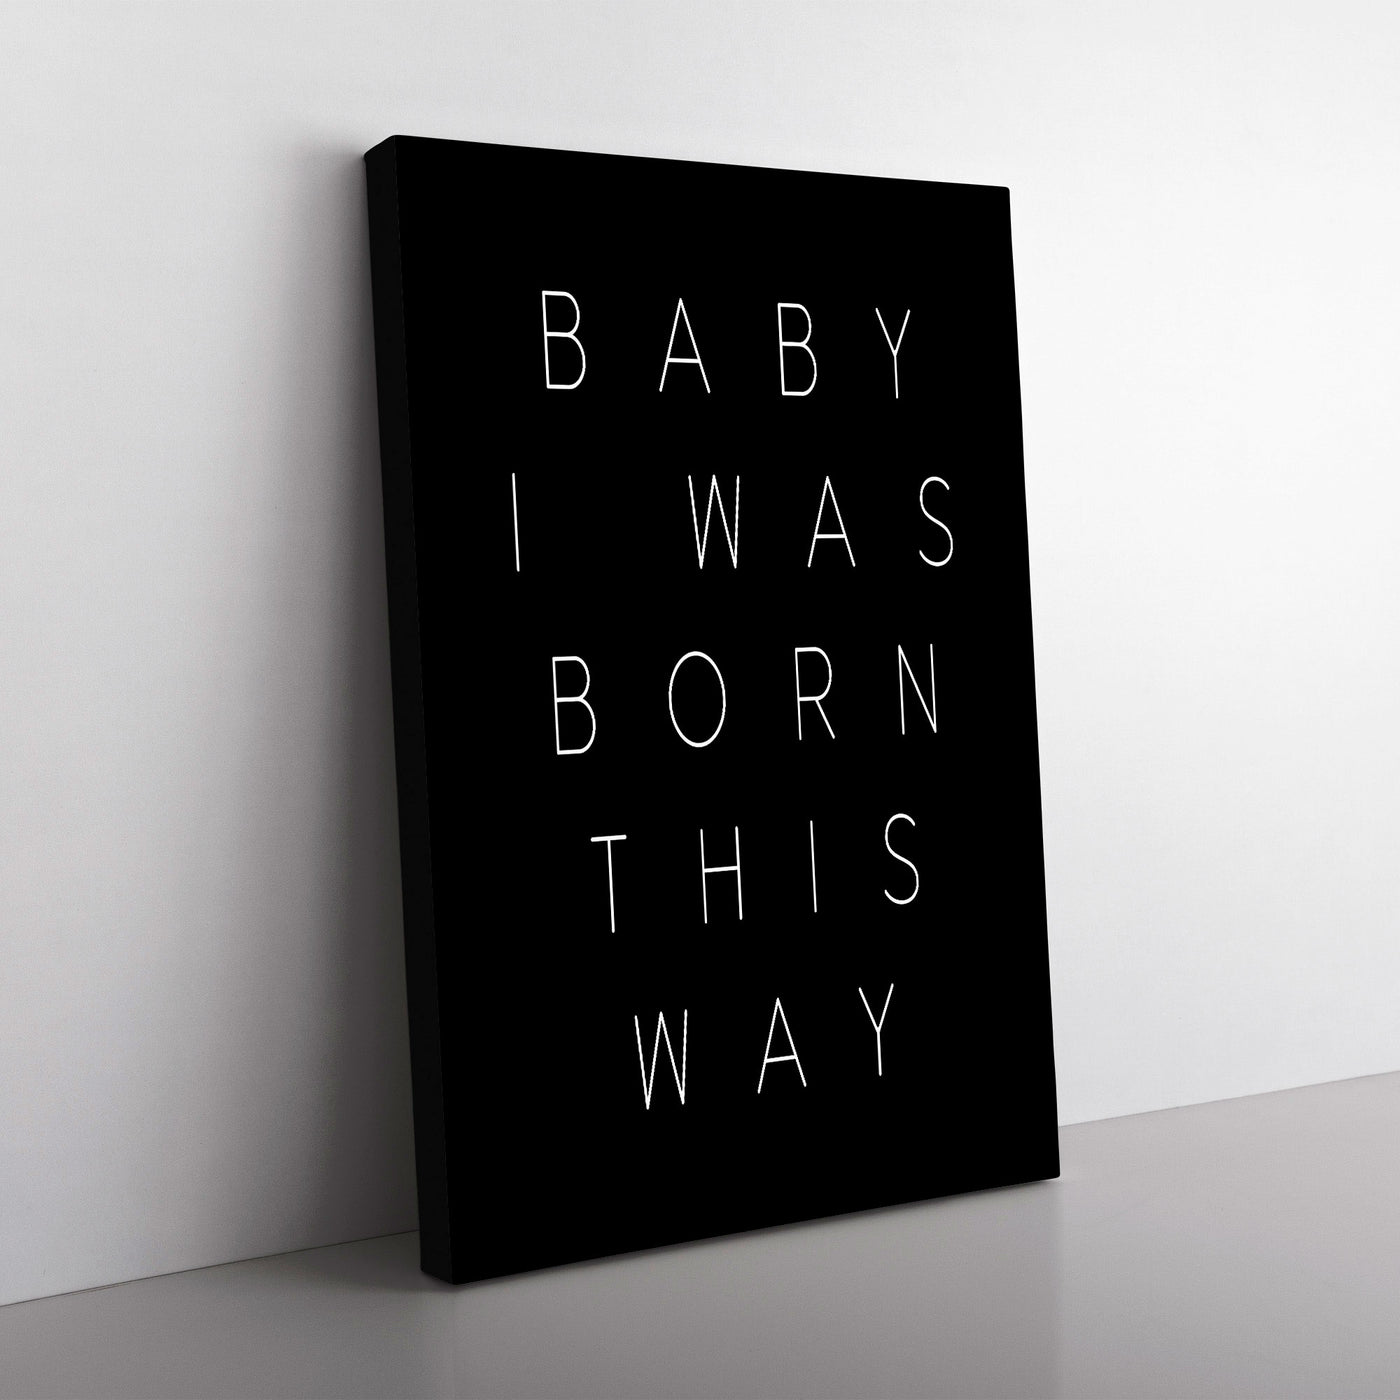 I Was Born This Way